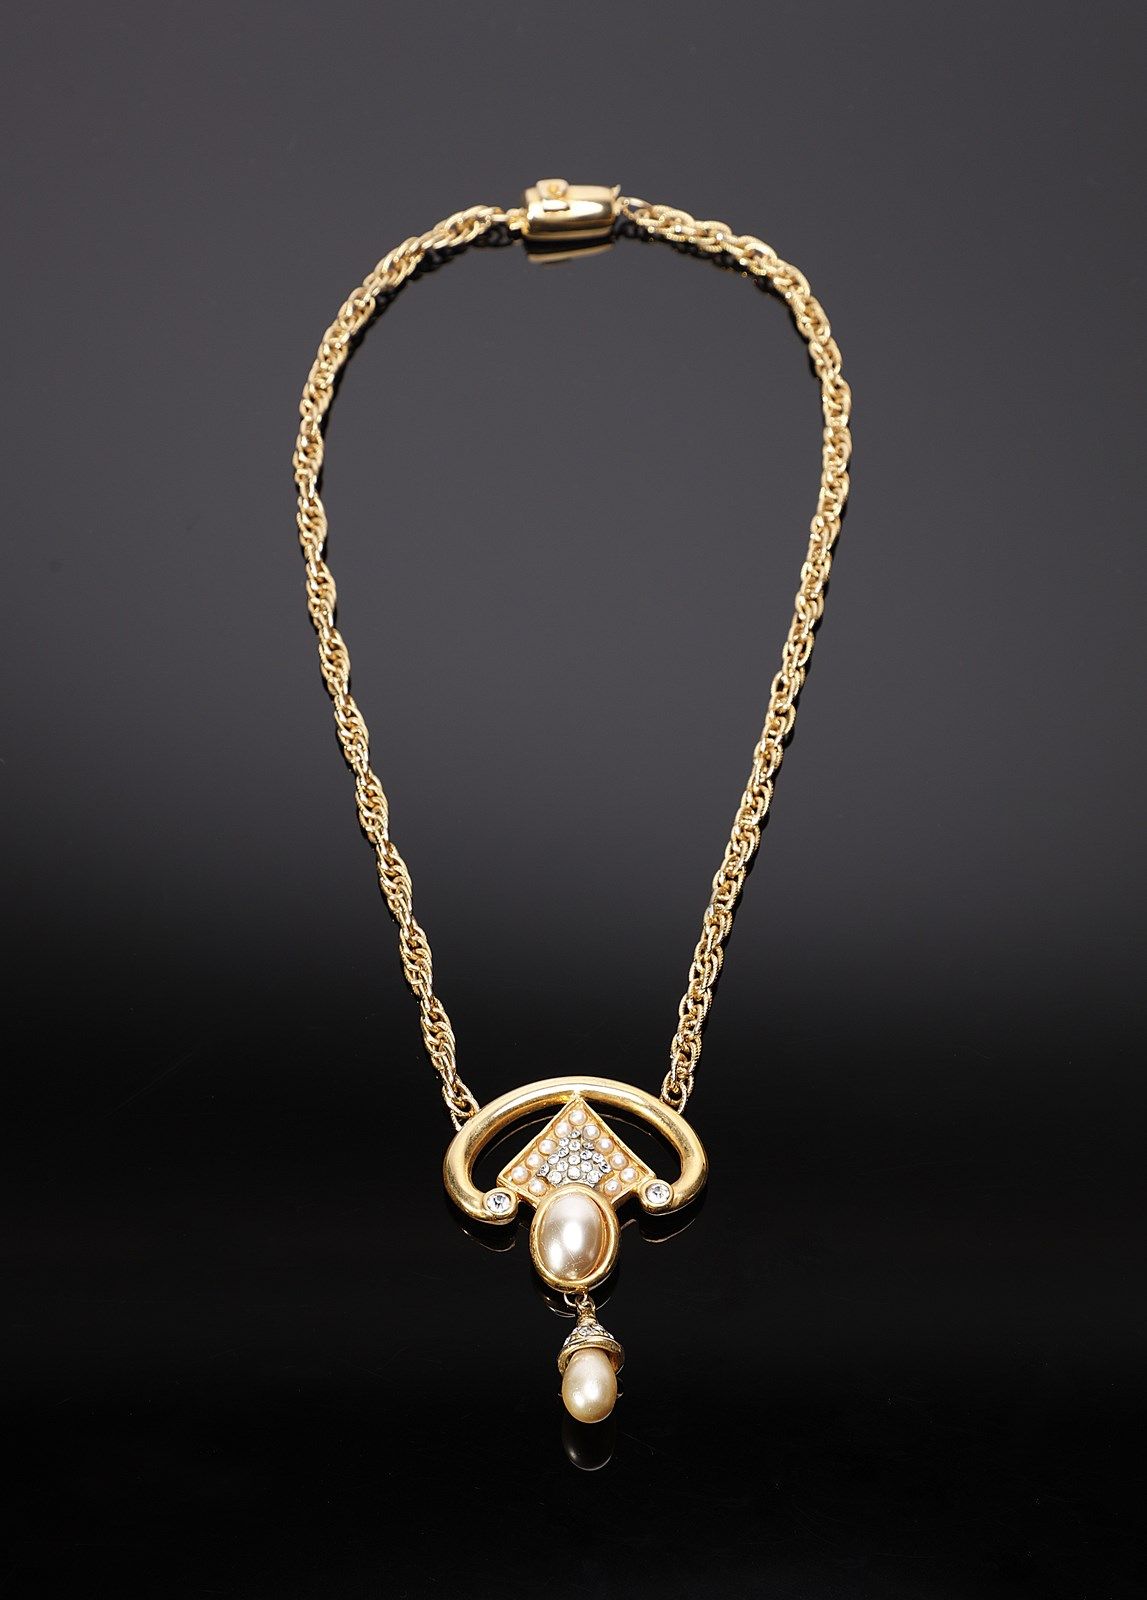 PIERRE CARDIN Golden necklace with an artificial pearl pendant and rhinestones. &hellip;